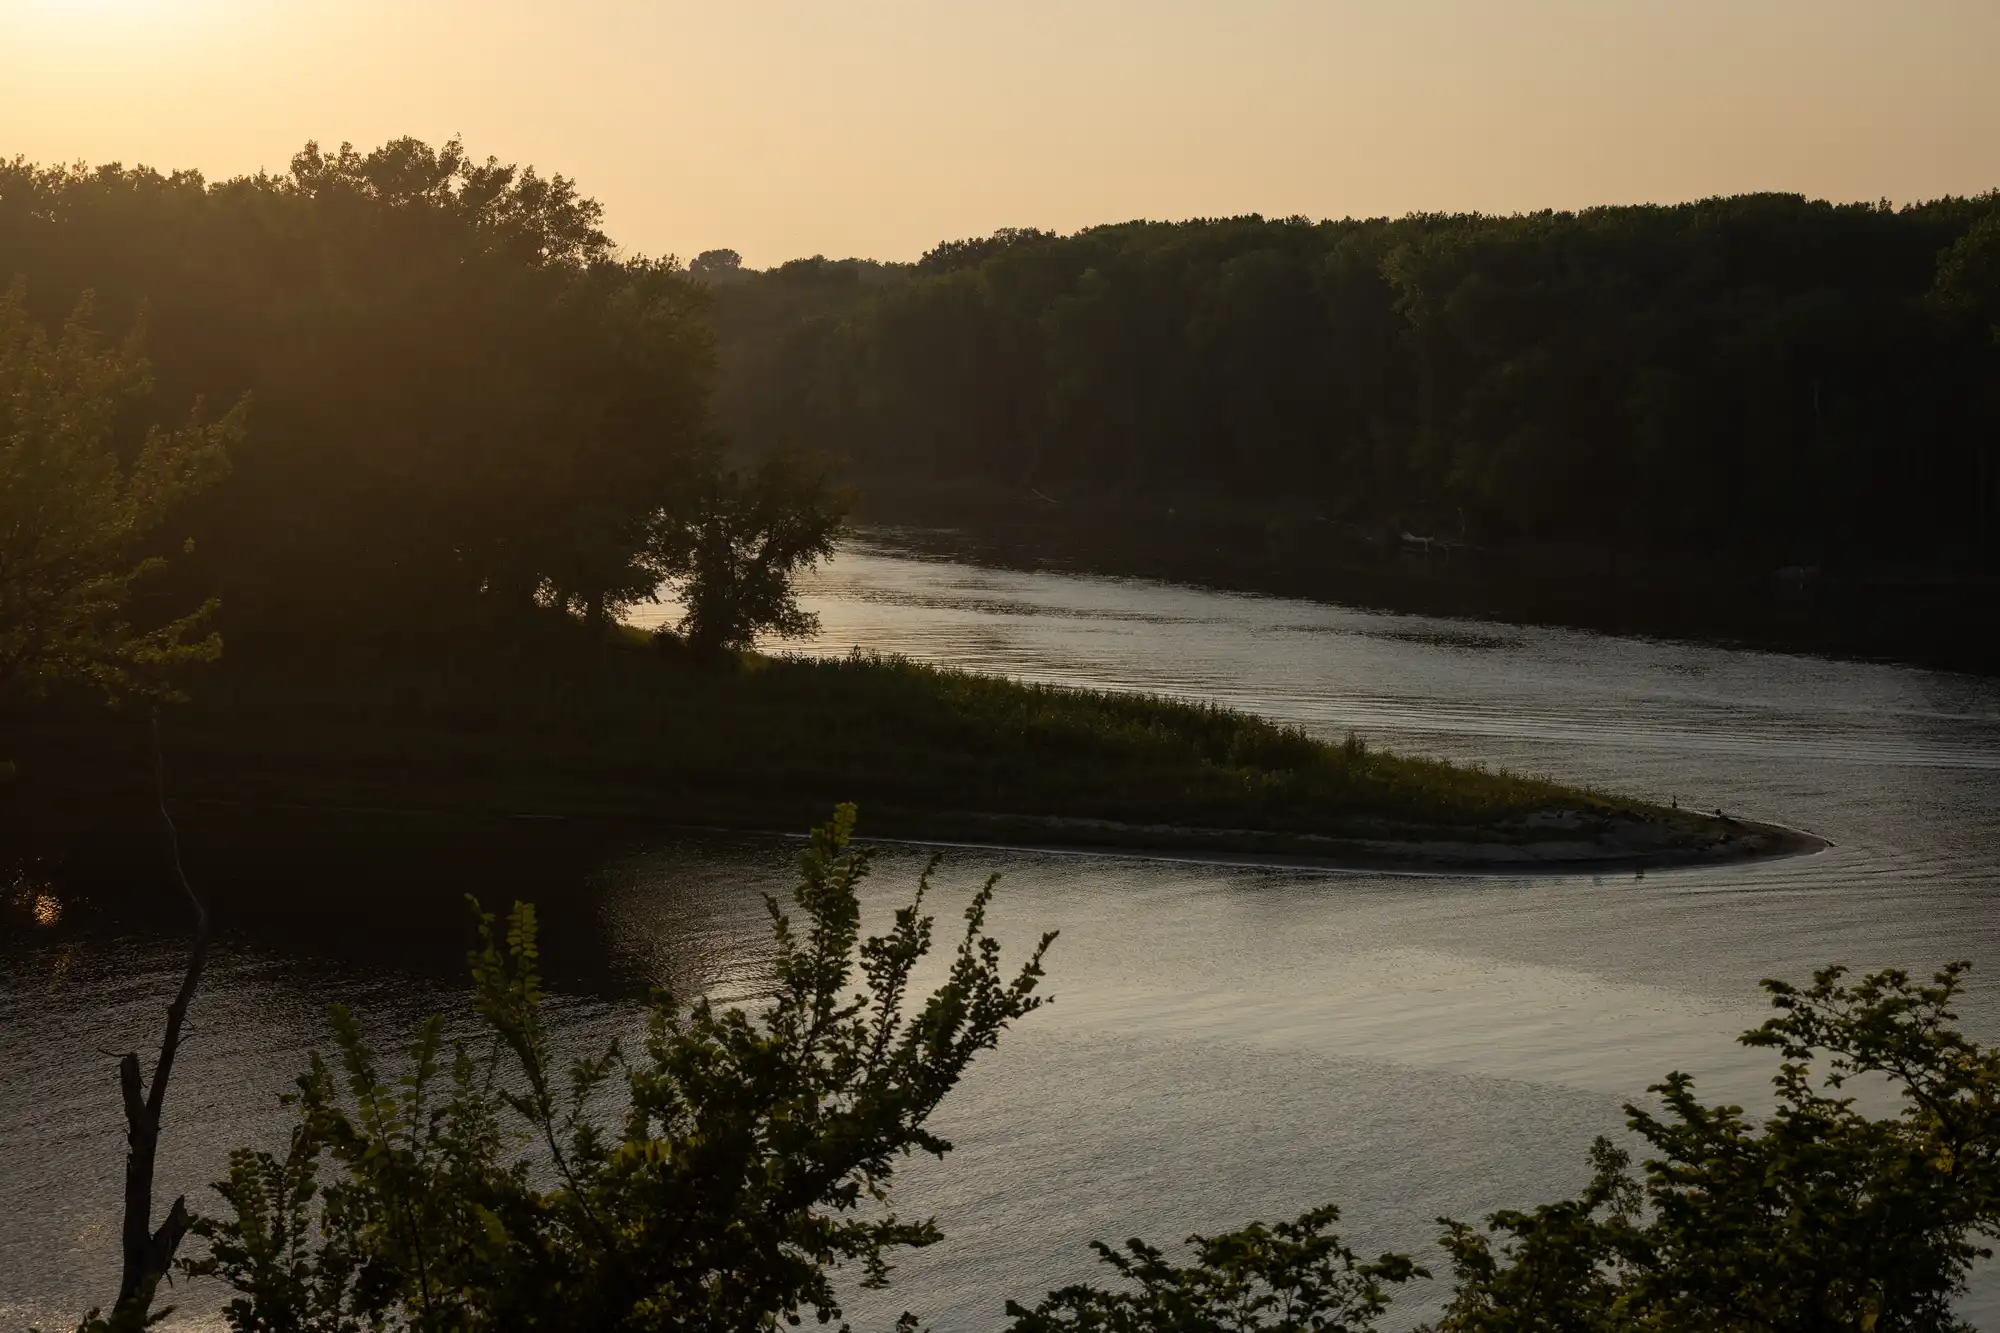 Director Melissa Scanlan Interviewed by MPR to Discuss Mississippi River Compact